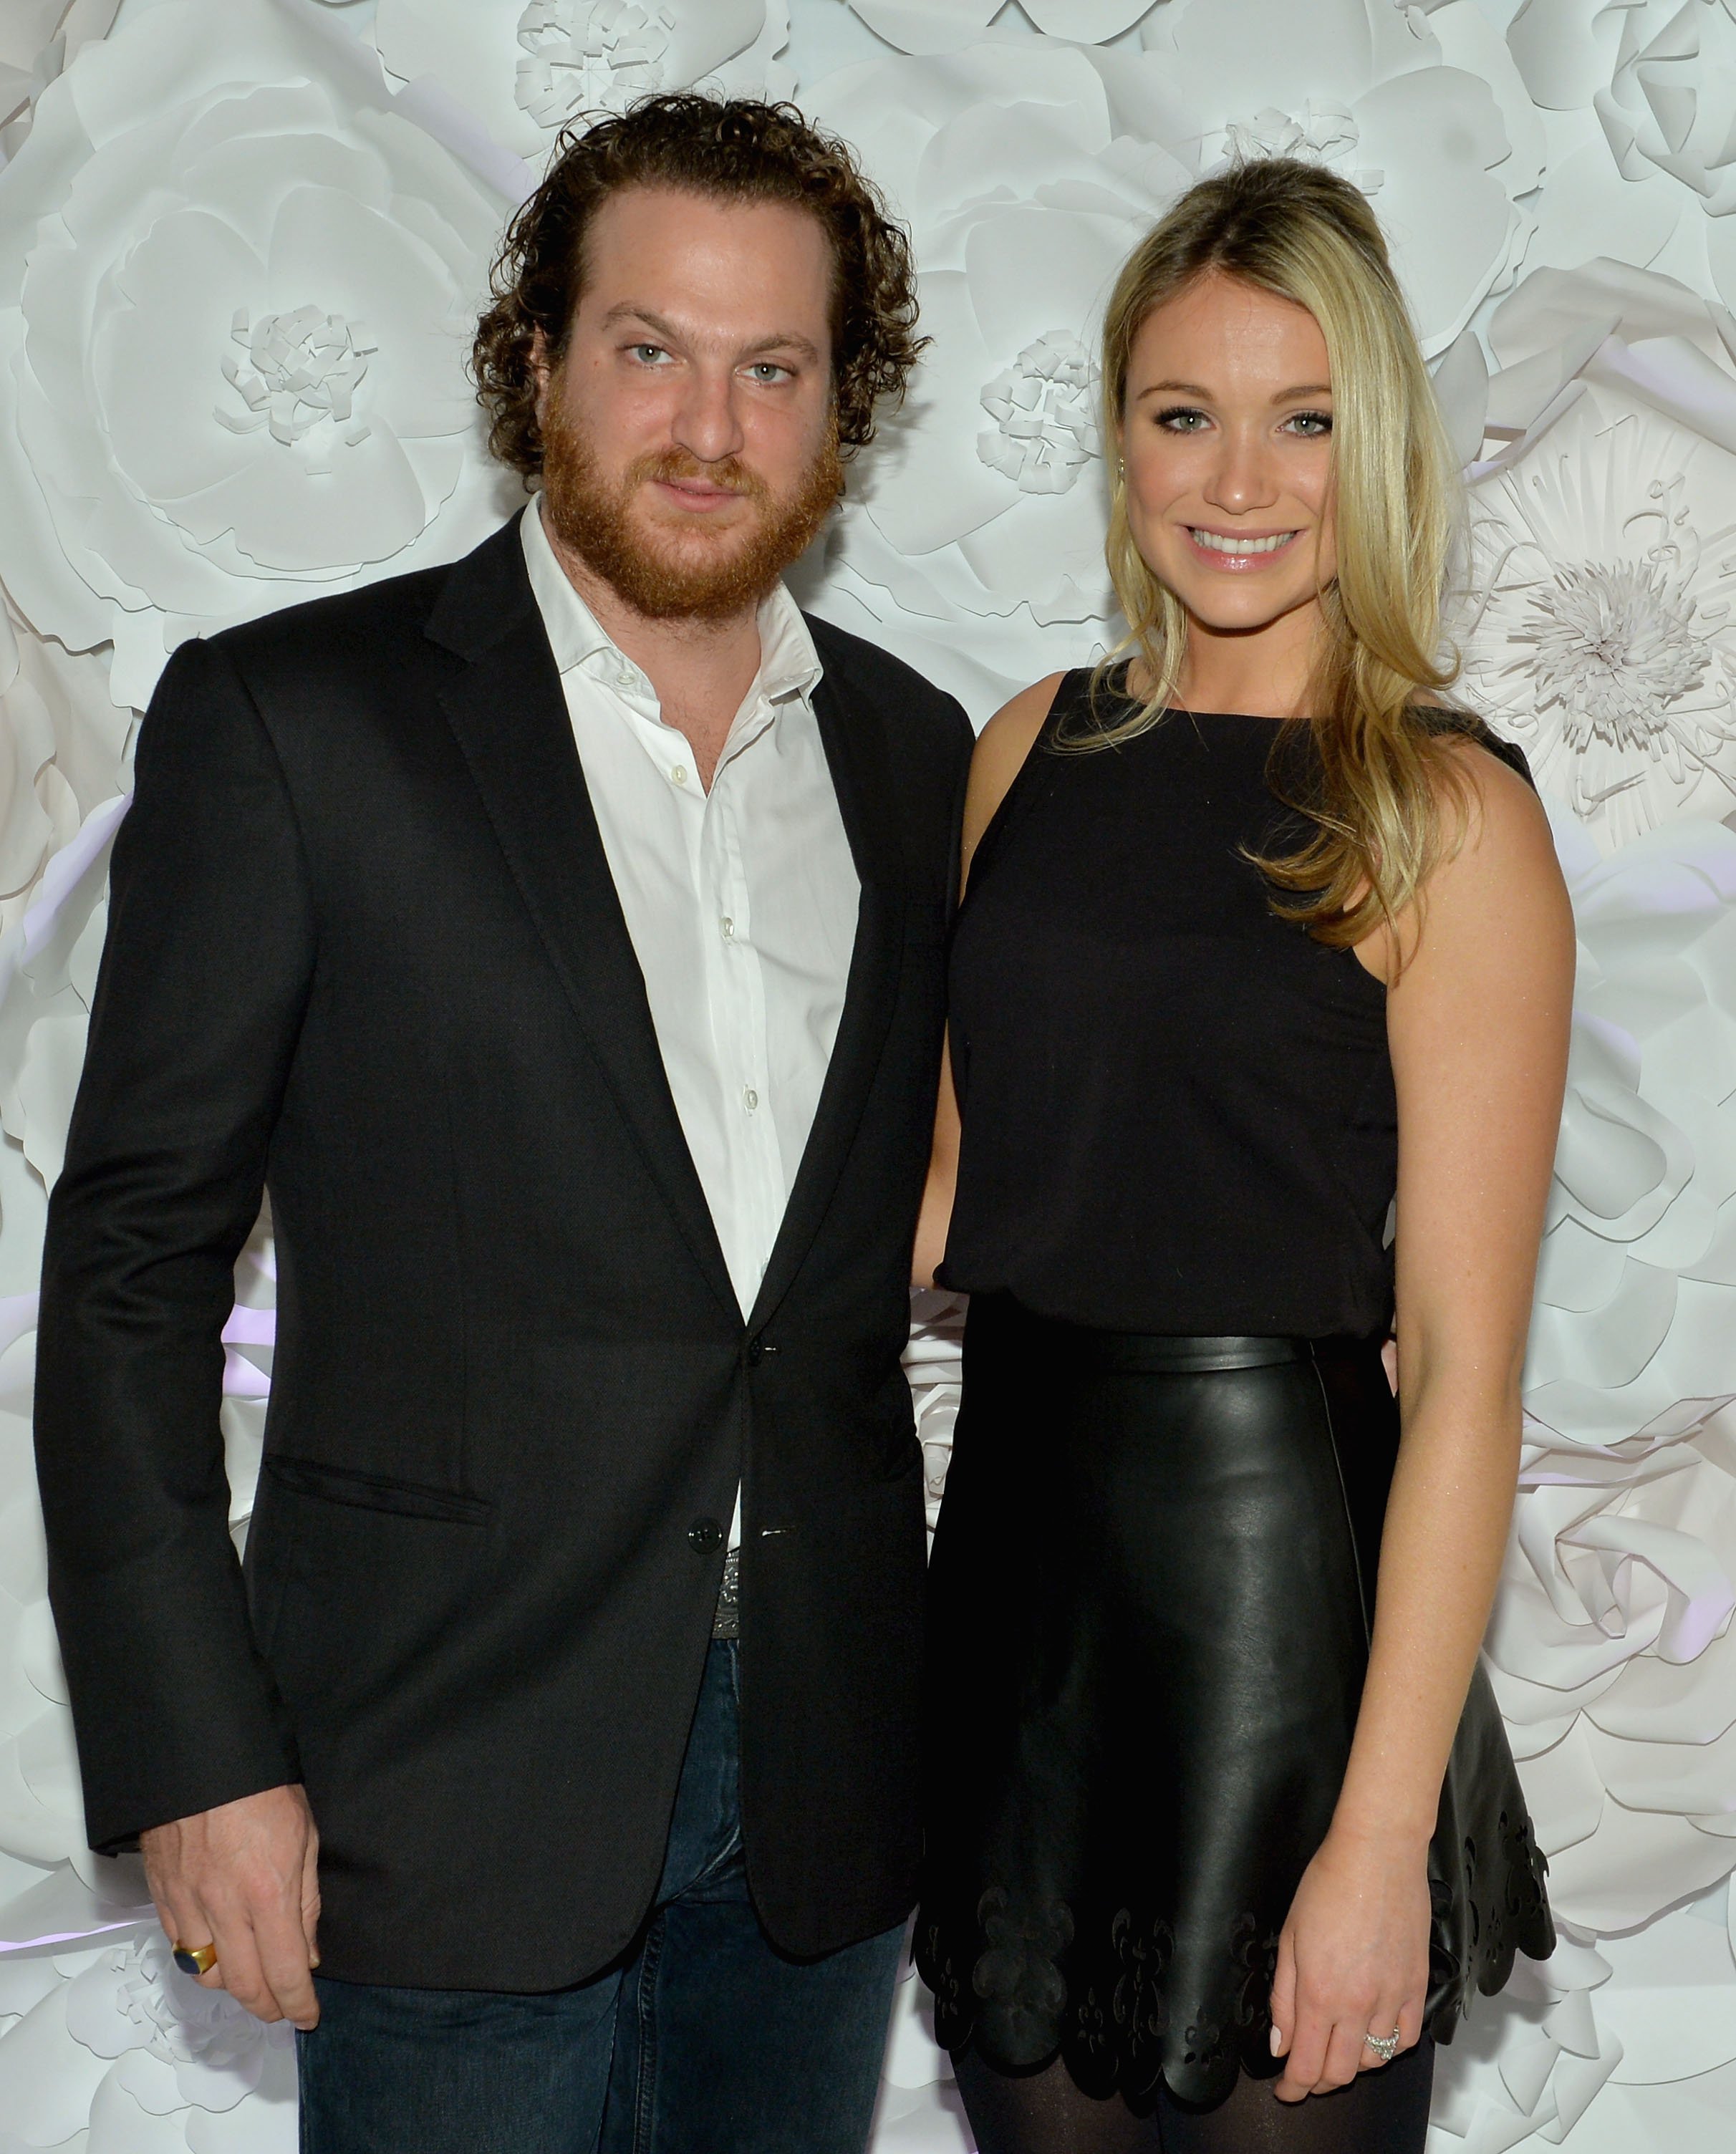 Evan Yurman and Katrina Bowden Photo: Andrew H Walker/Getty Images